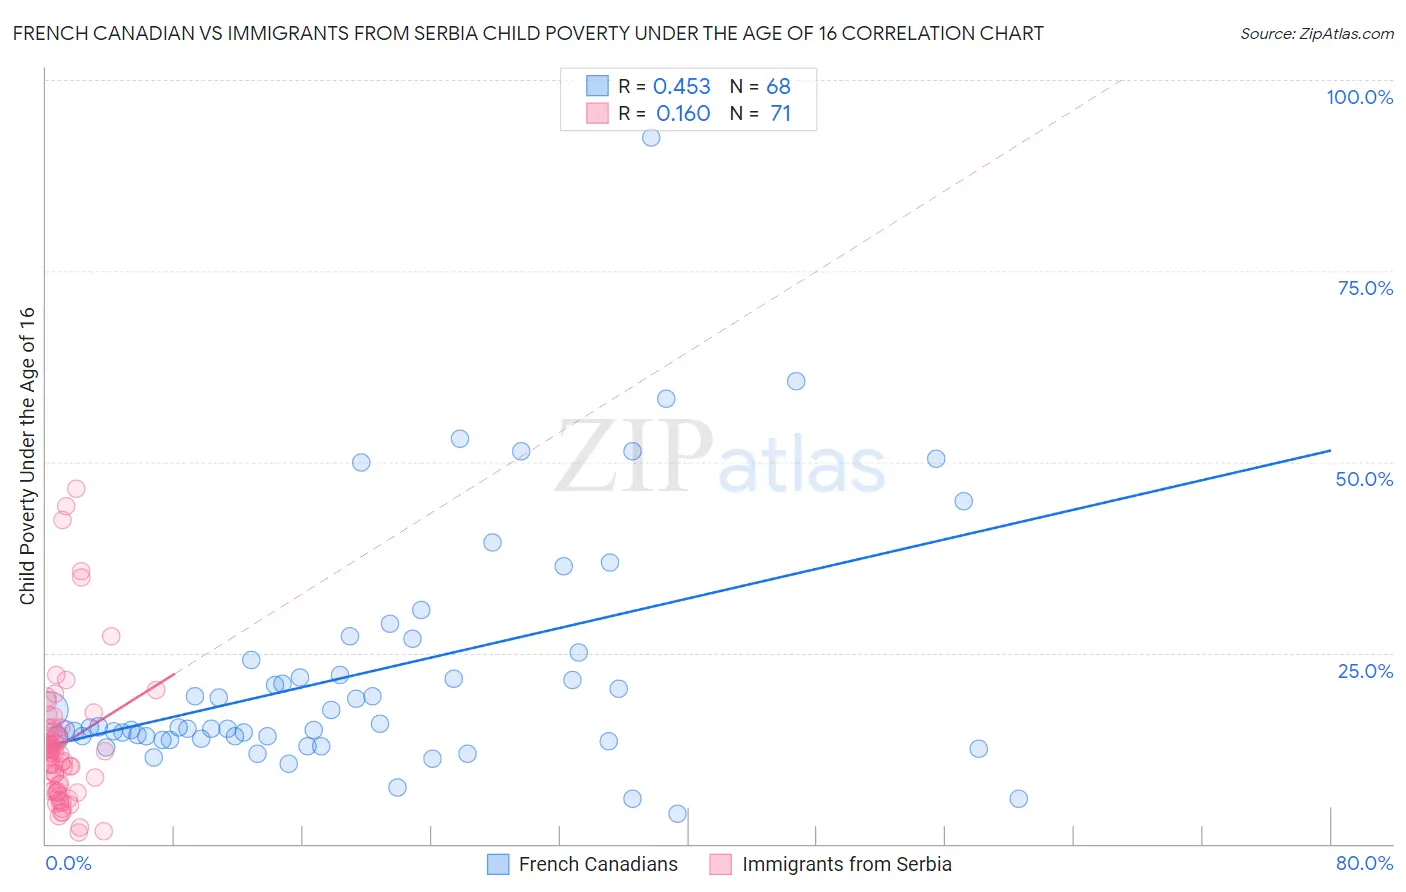 French Canadian vs Immigrants from Serbia Child Poverty Under the Age of 16